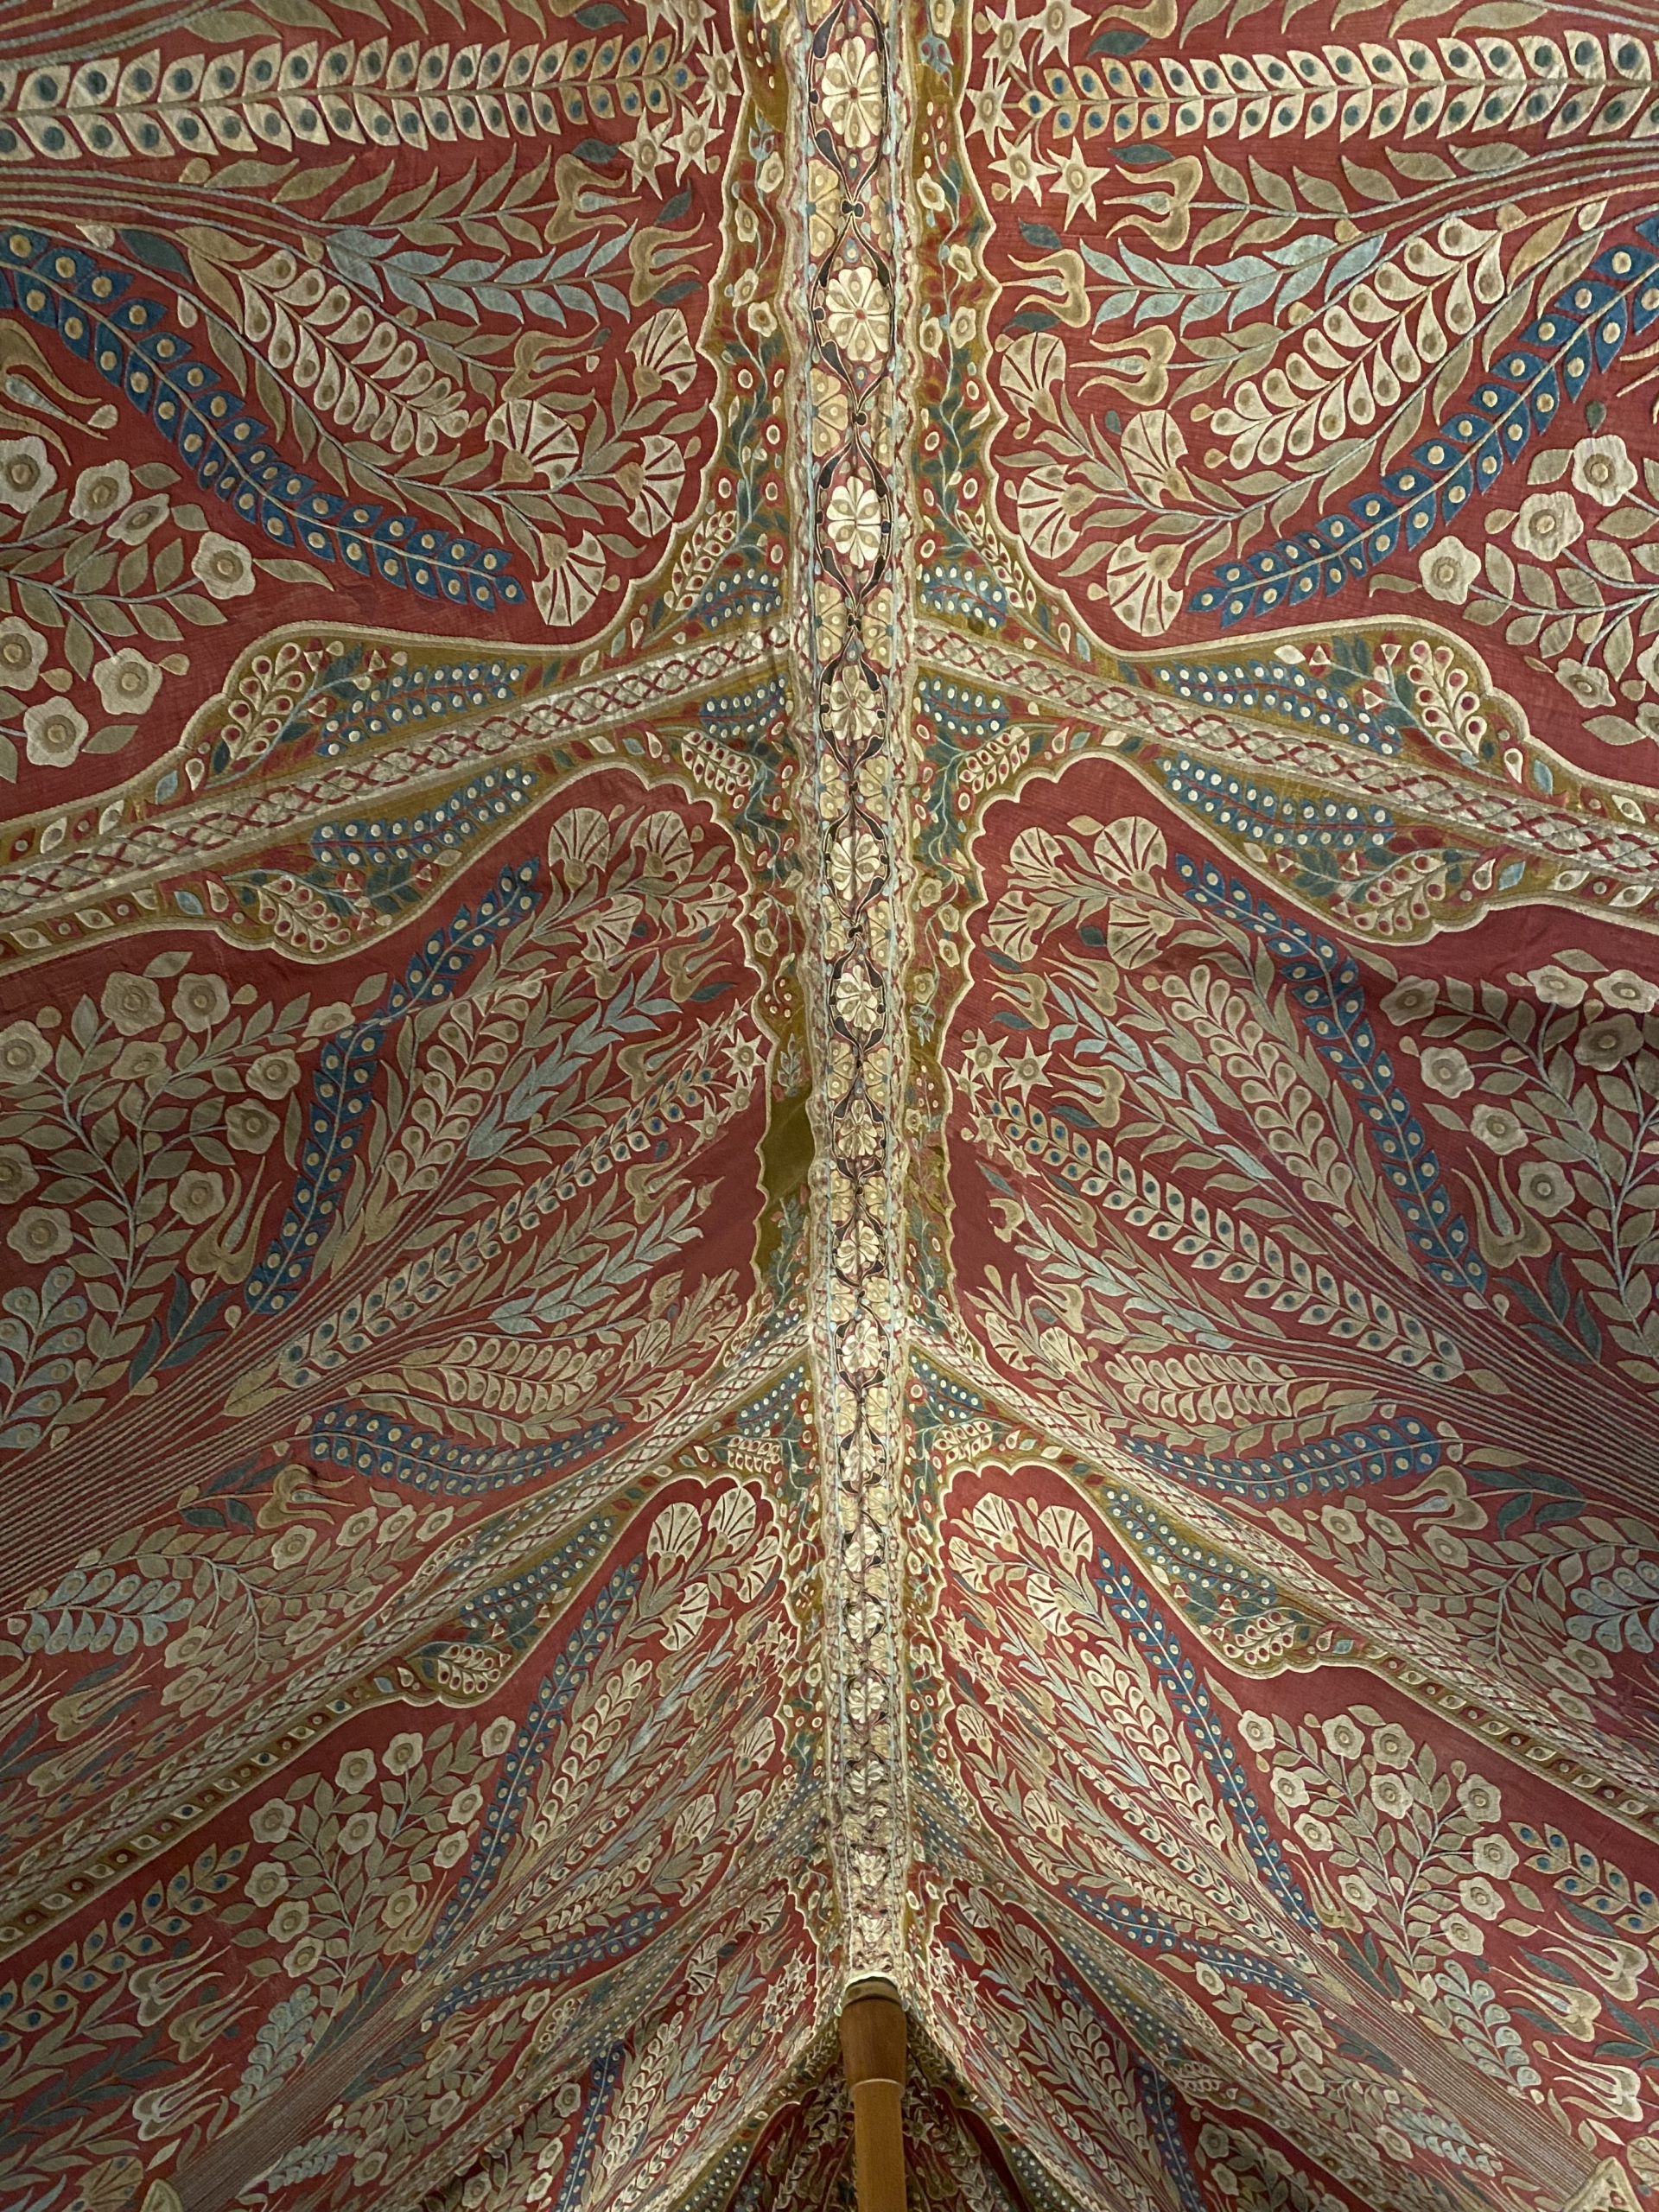 The ceiling of the tent